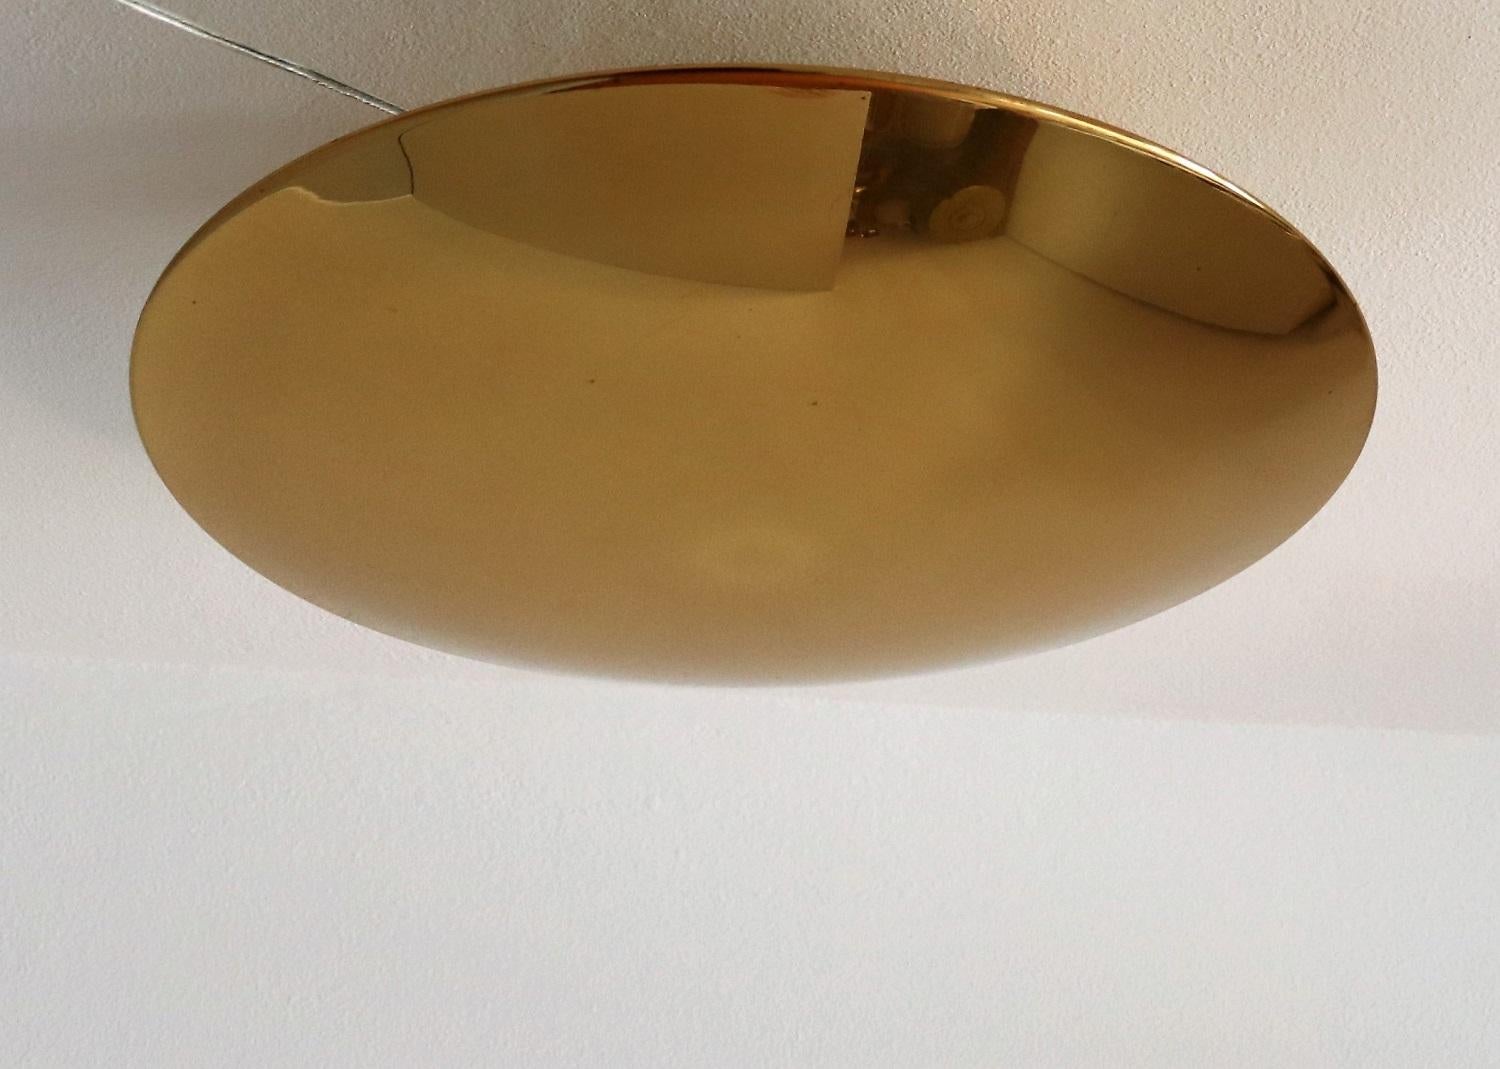 Beautiful and big ceiling light or wall sconce made of full brass by Florian Schulz in the 1980s.
The large round dome plate is screwed on the wall or ceiling unit, which holds five Edison light bulbs.
The brass has taken over the years a